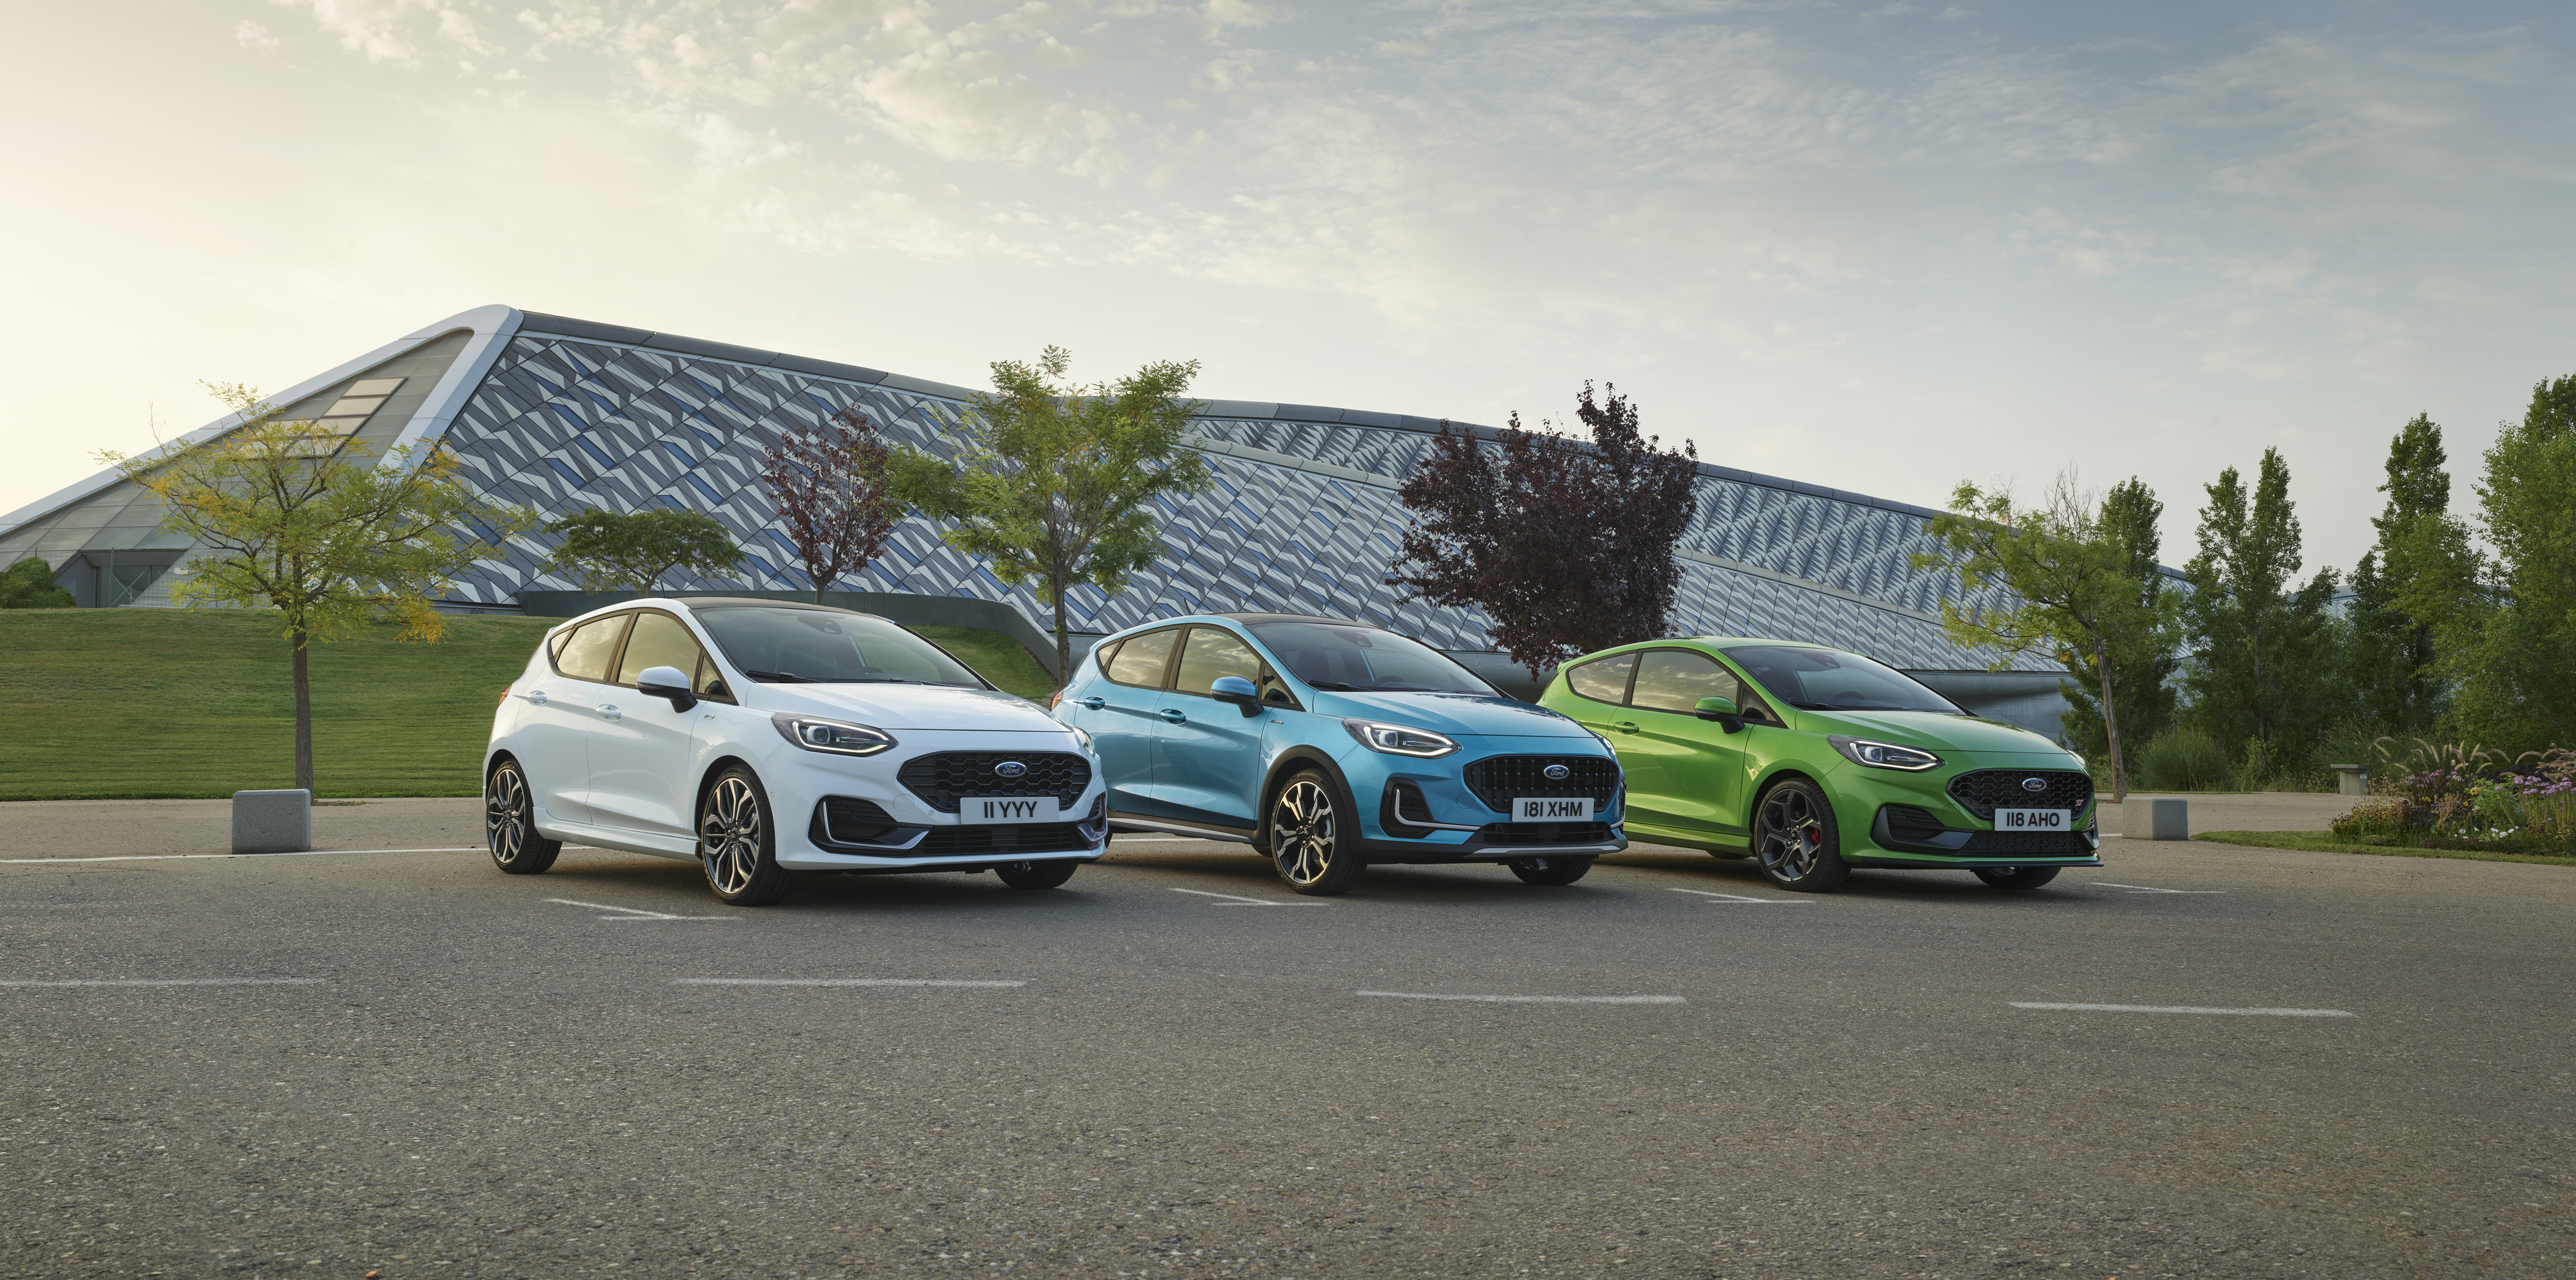 Gestreept String string industrie Ford Unveils Connected, Electrified, Confident New Fiesta: The Small Car  Ready for the Future | Great Britain | Ford Media Center